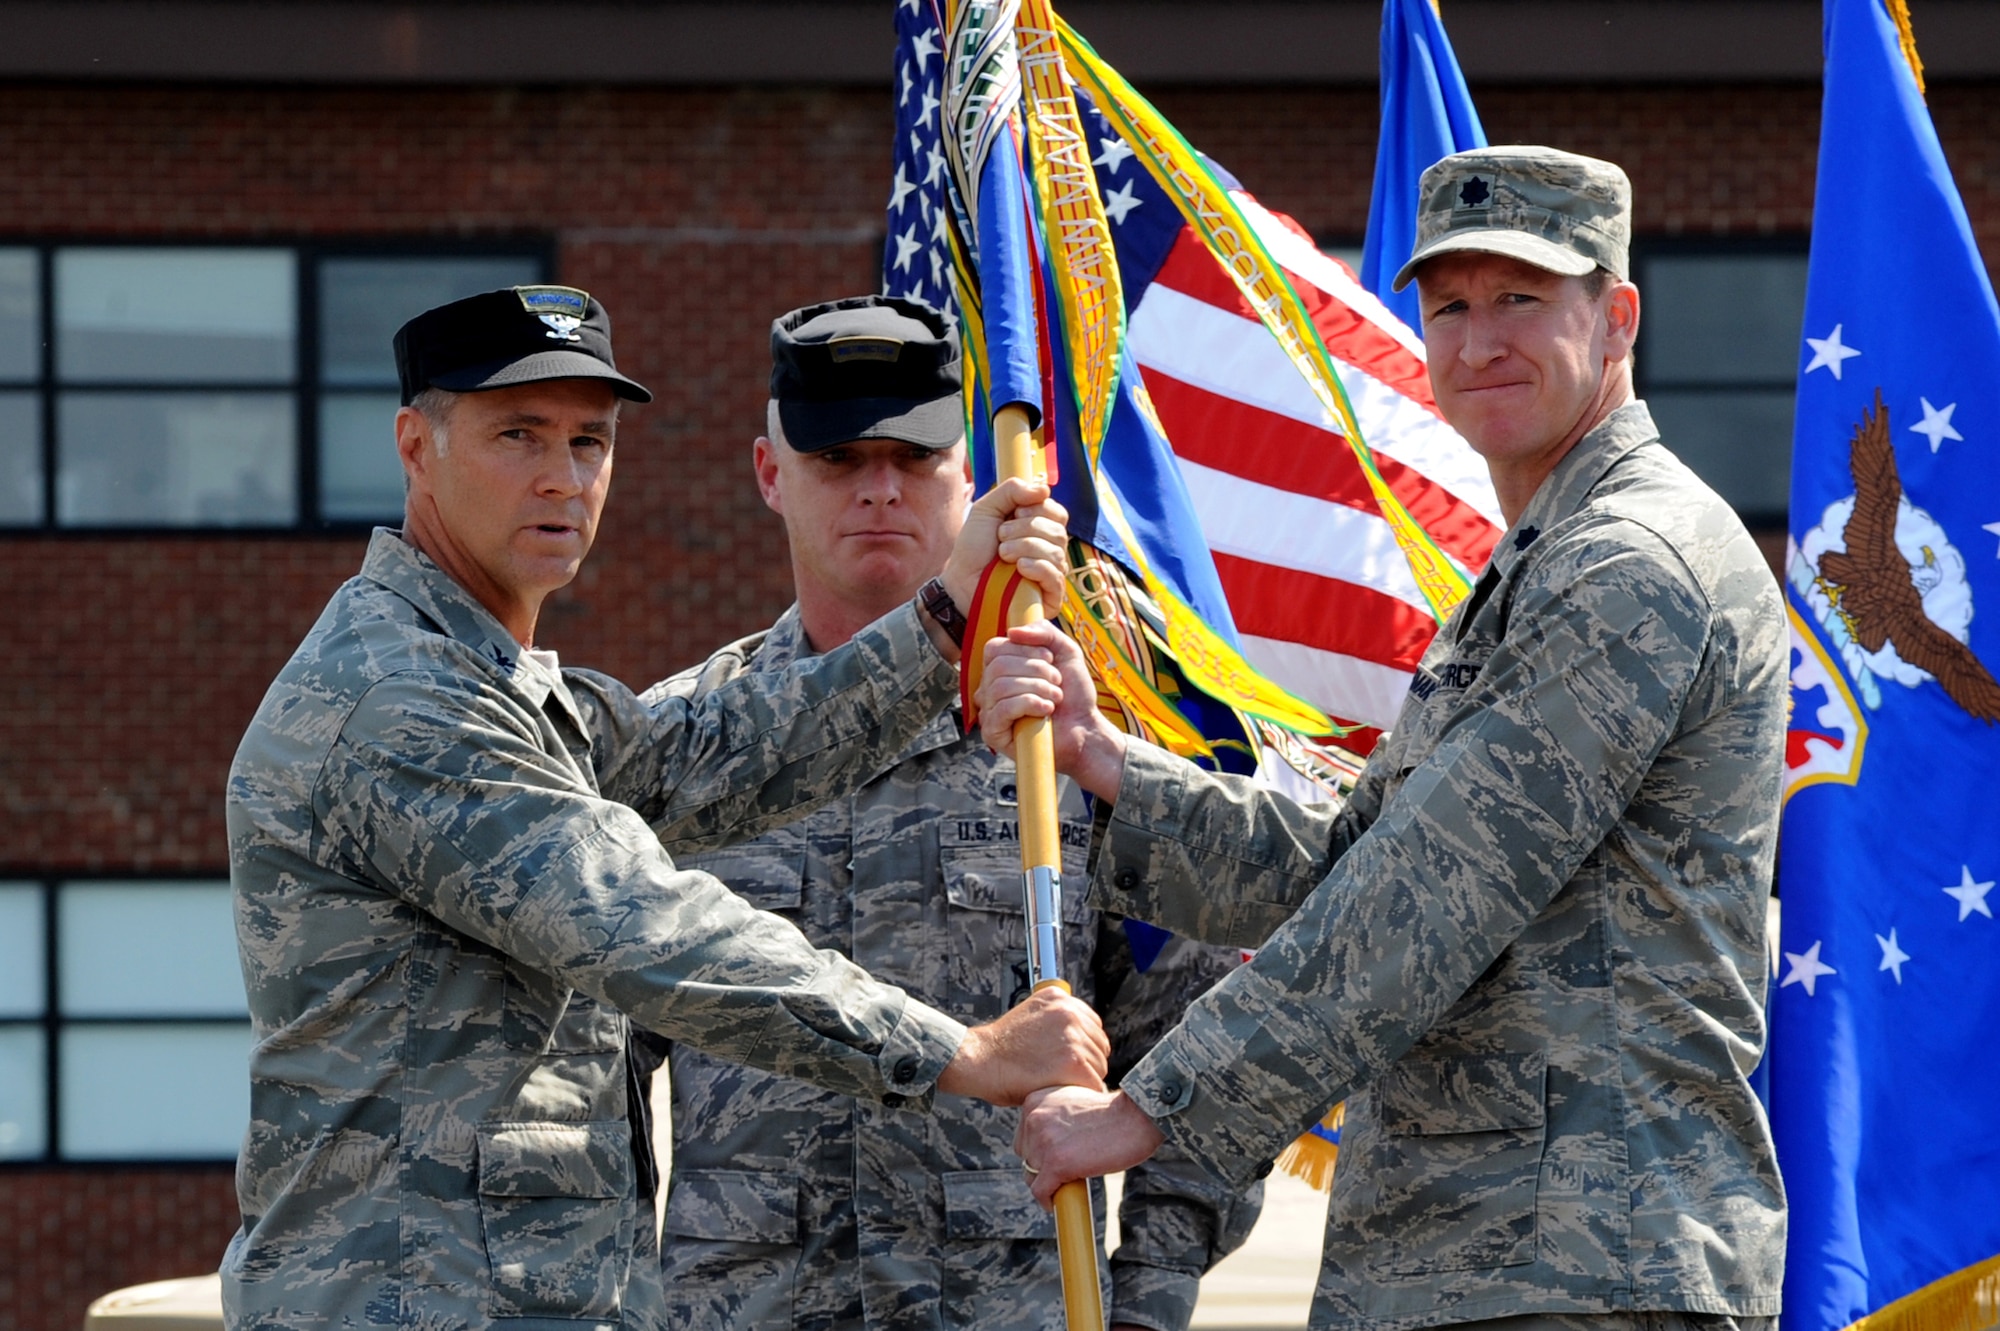 Col. Mark Ellis, Expeditionary Operations School commandant, presents the 421st Combat Training Squadron guidon to Lt. Col. David Lenderman July 13 during a change of command ceremony at Joint Base McGuire-Dix-Lakehurst, N.J.  Lt. Col. Mitchell Monroe relinquished command of the 421st CTS housed at the U.S. Air Force Expeditionary Center on Fort Dix. (U.S. Air Force Photo/Staff Sgt. Nathan G. Bevier) 